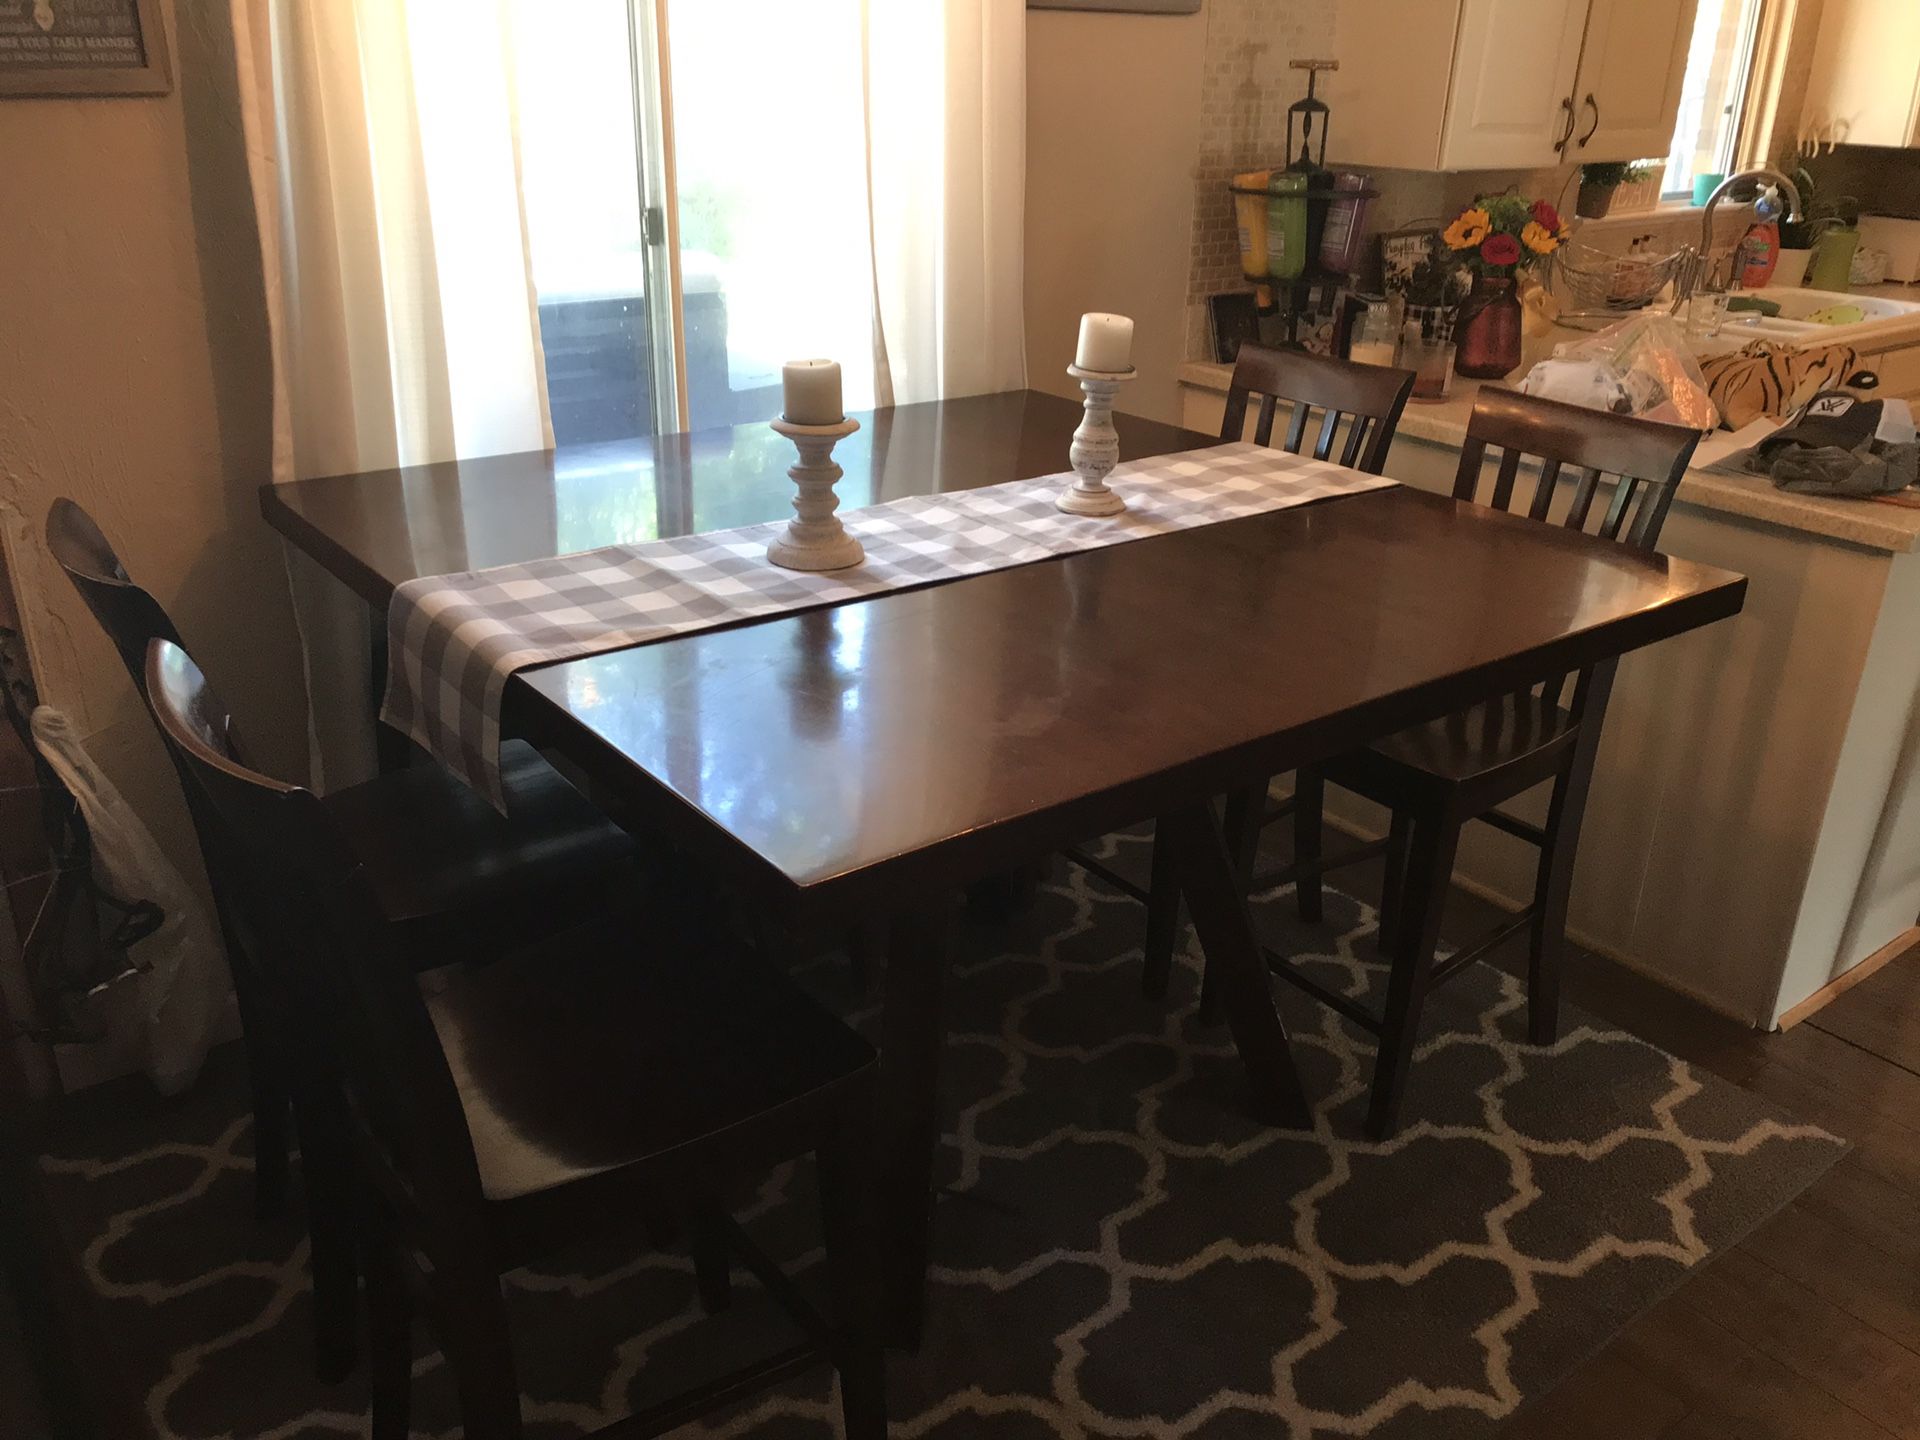 Bar Height Kitchen Table w/ 4 Chairs $150 obo